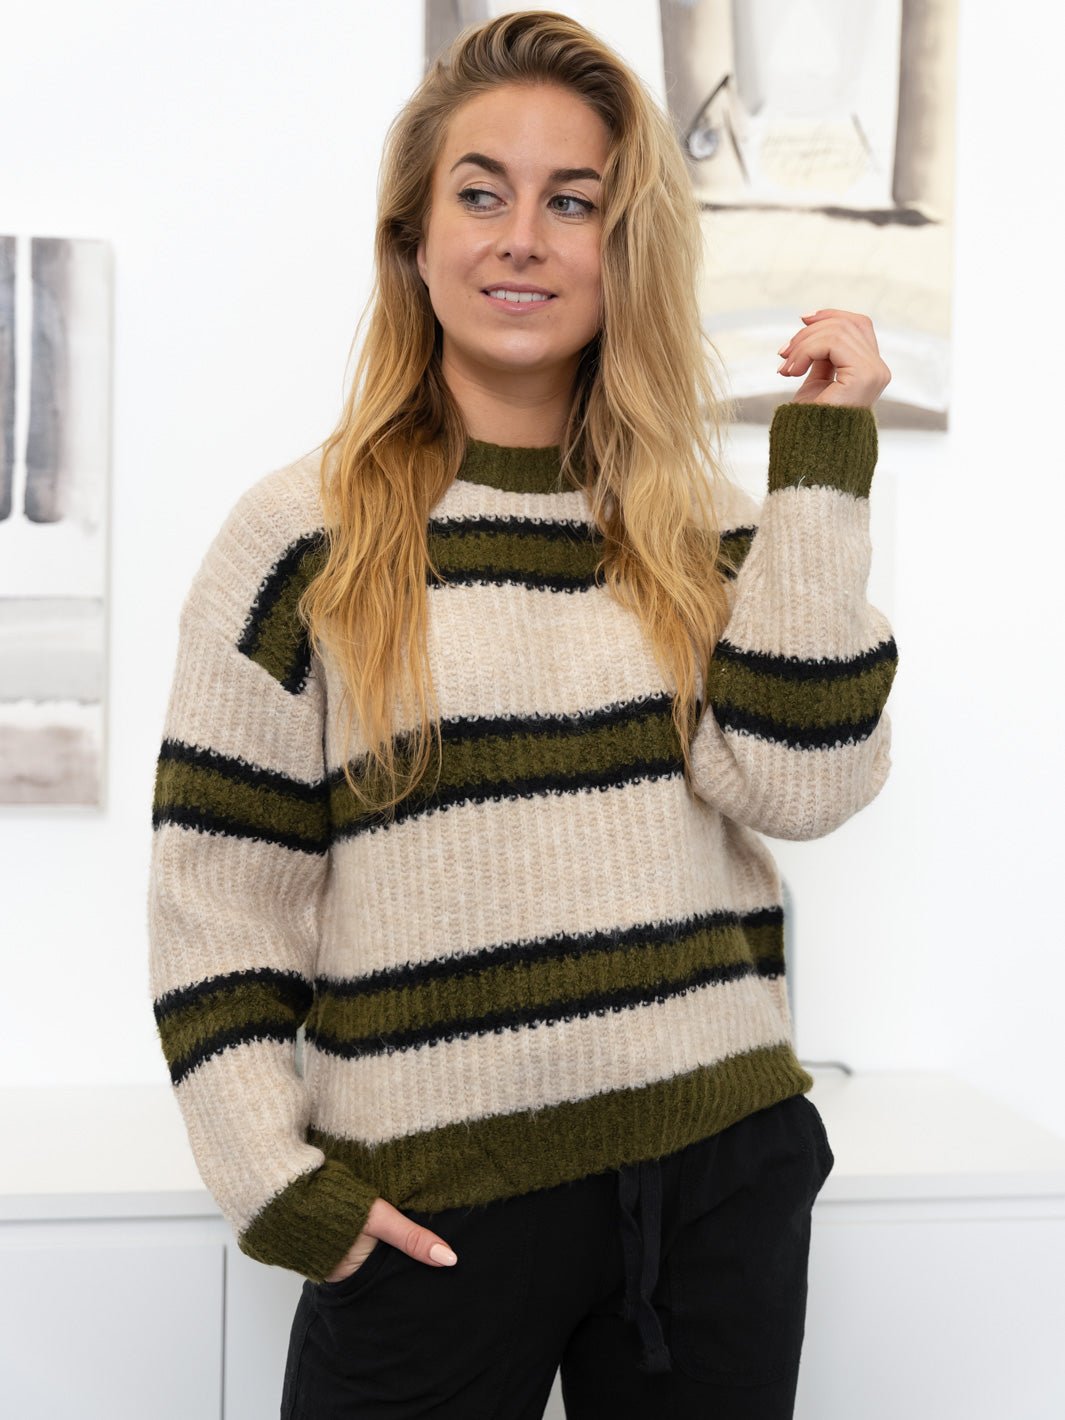 Liberté Fro pullover sand/army/black stripe - Online-Mode